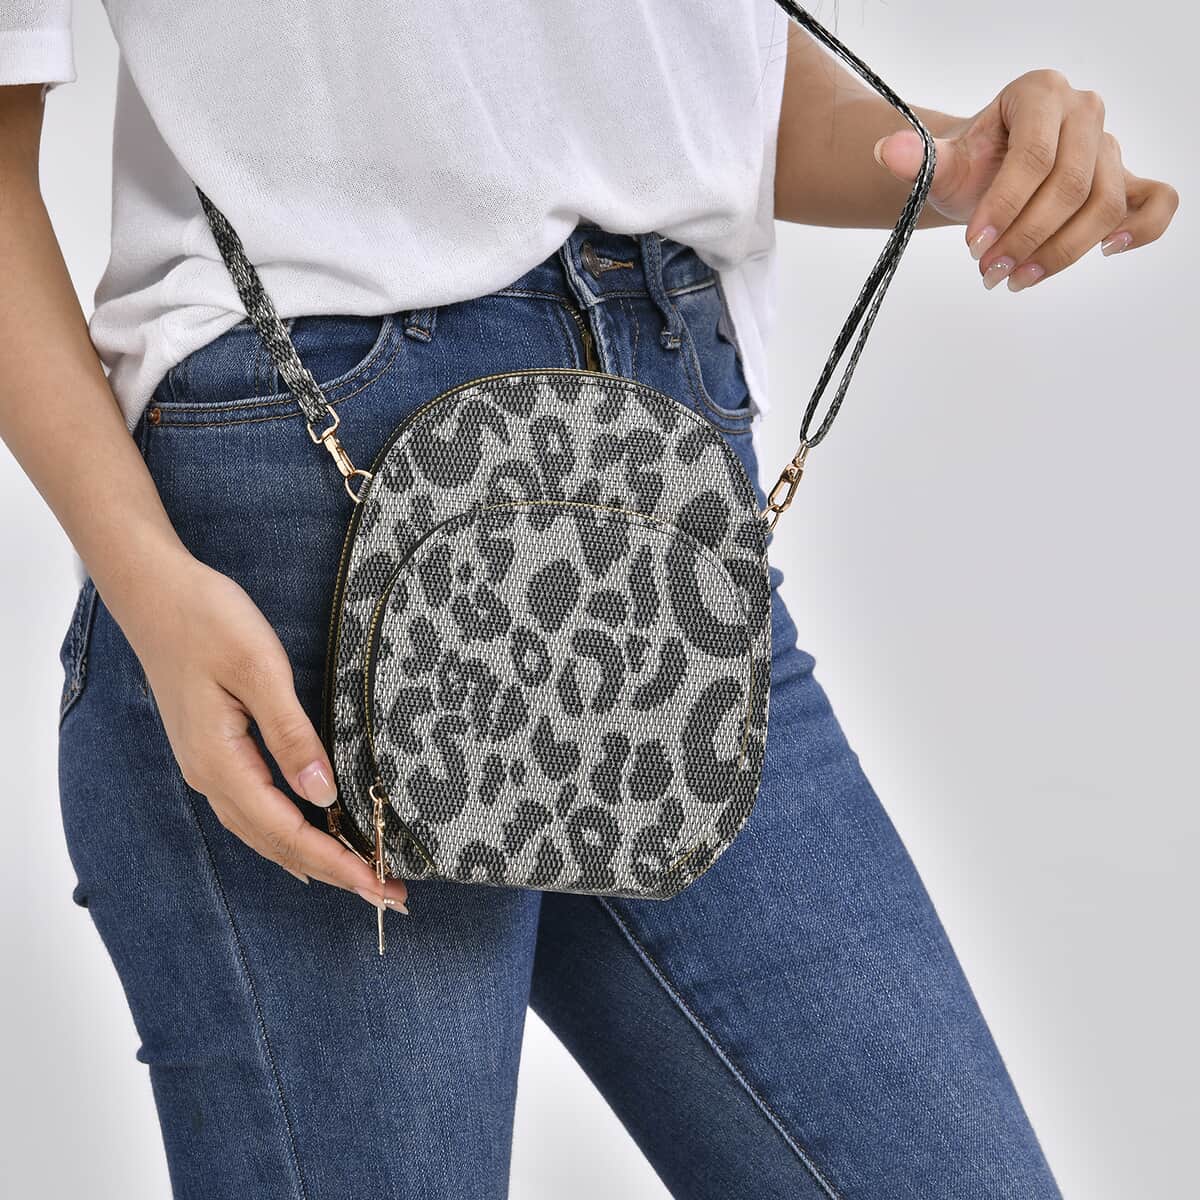 Black Leopard Faux Leather Crossbody Cell Phone Bag (7.9"x6.7"x2.8") with Long Strap image number 2